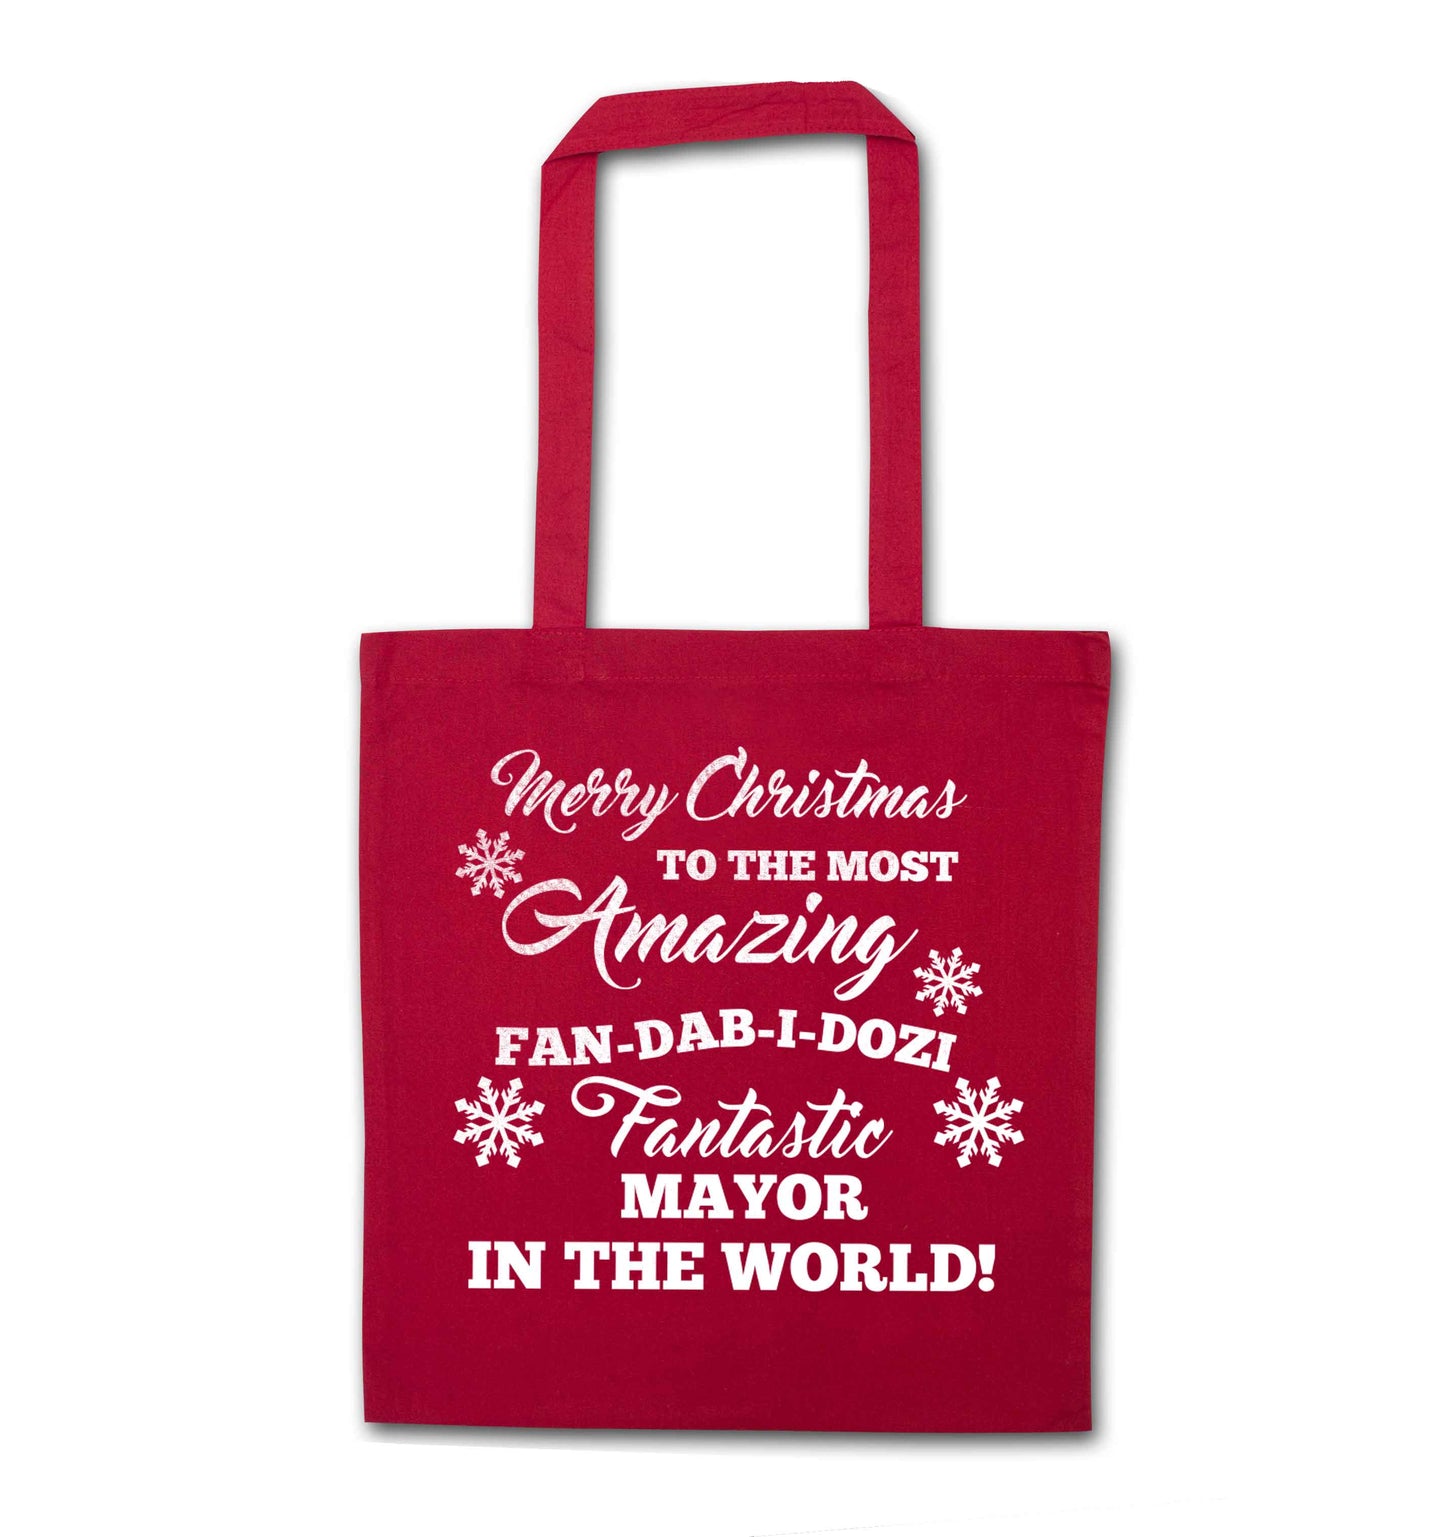 Merry Christmas to the most amazing fireman in the world! red tote bag